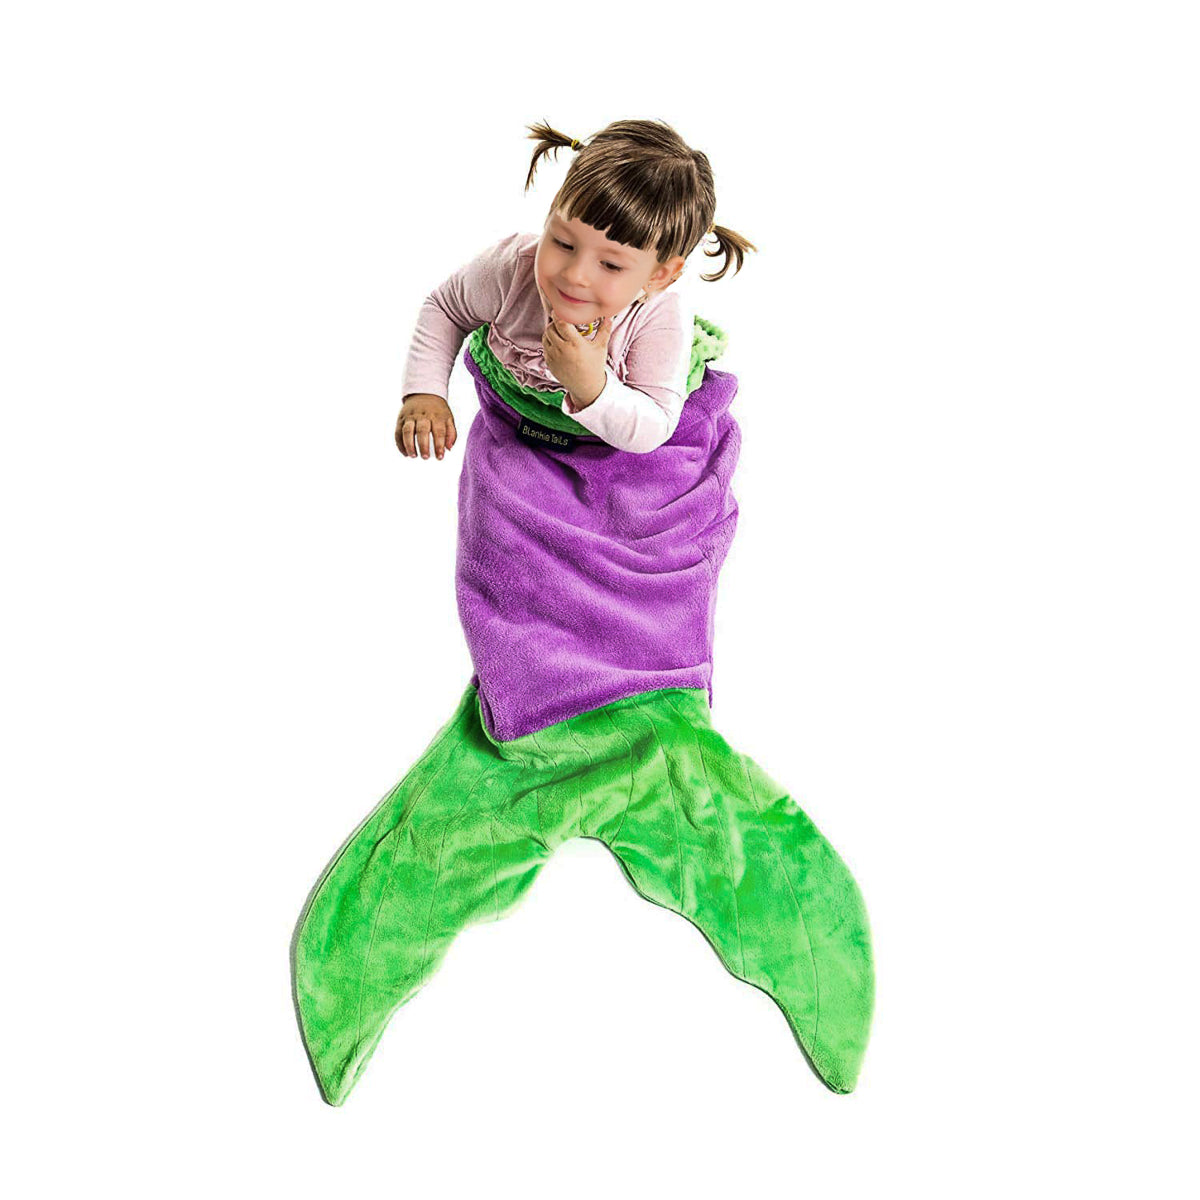 The Original Mermaid Blanket For Kids & Adults By Blankie Tails